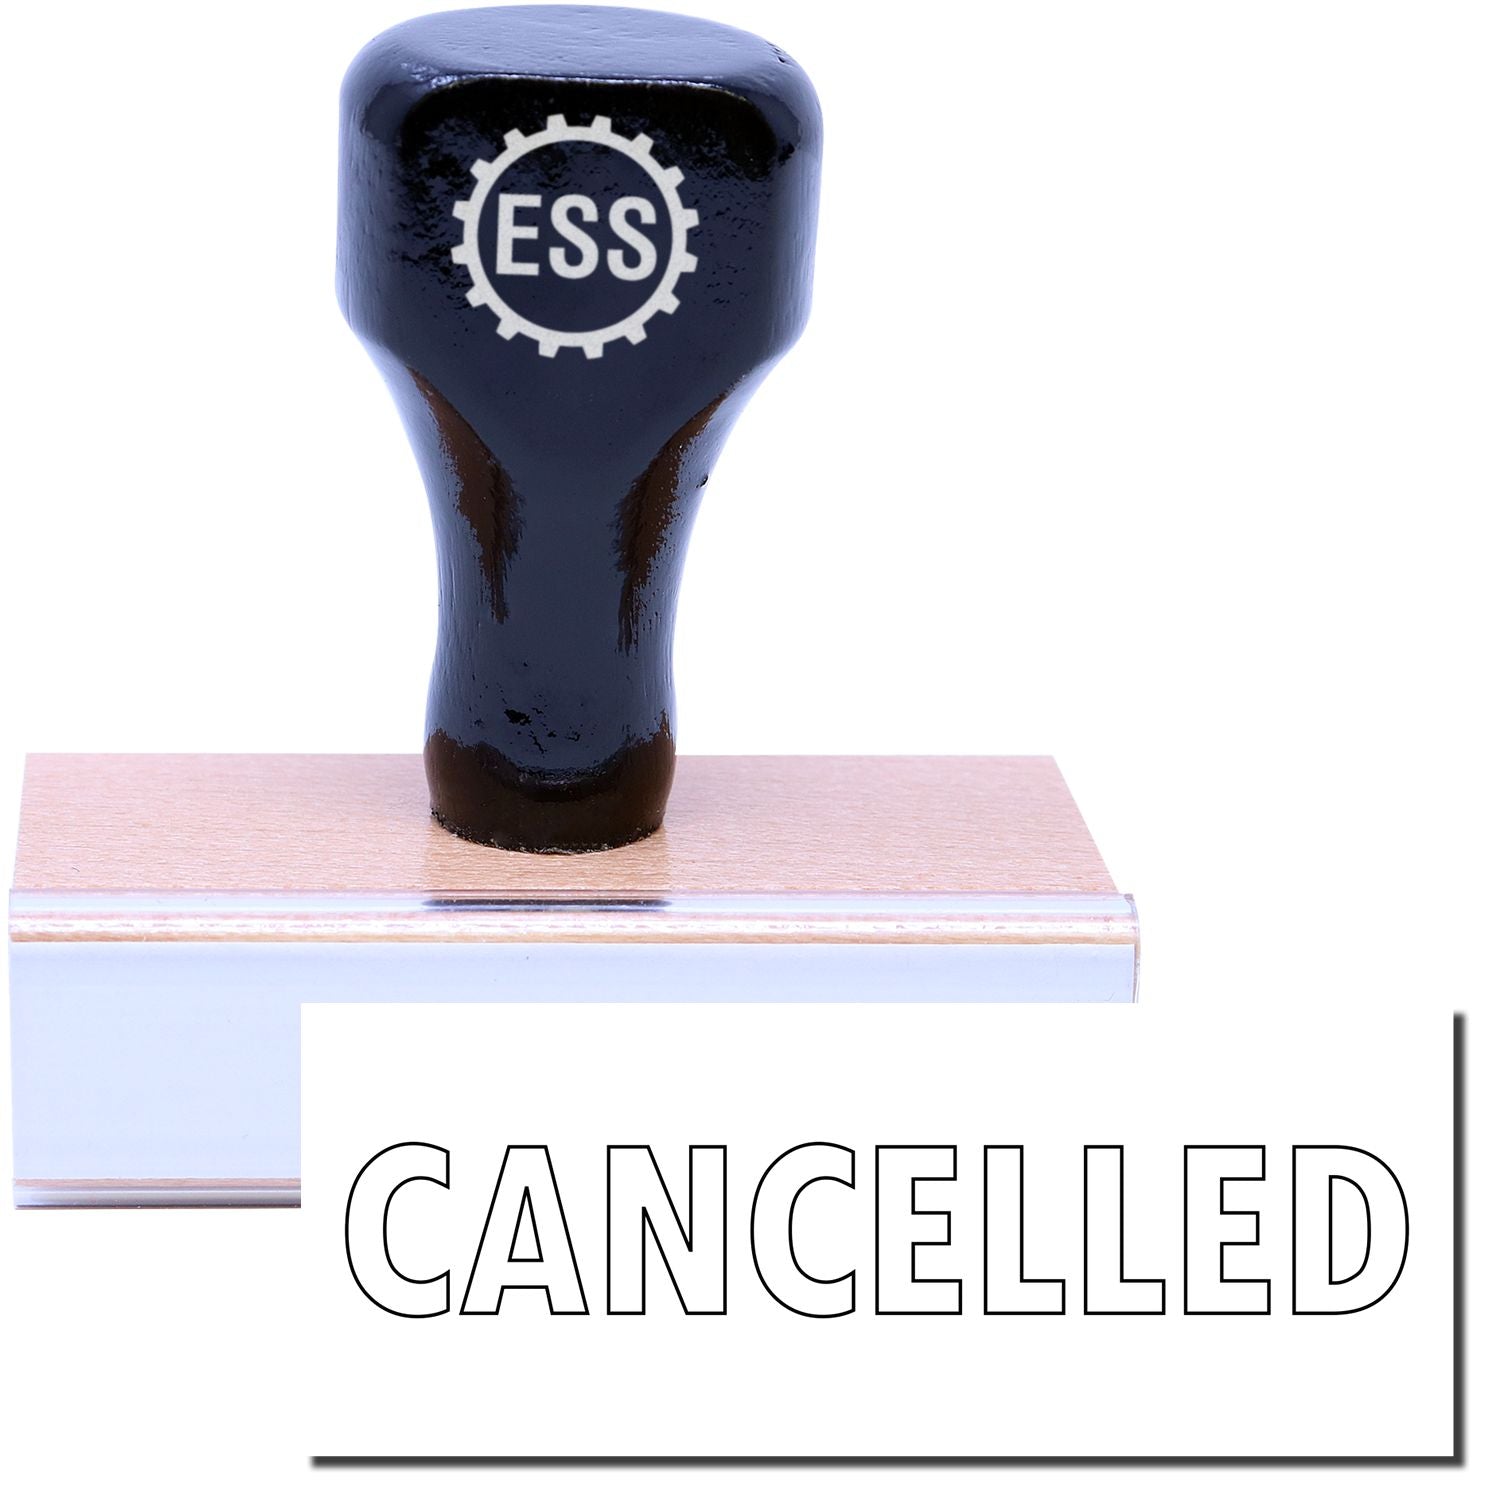 A stock office rubber stamp with a stamped image showing how the text "CANCELLED" in a large font and outline style is displayed after stamping.